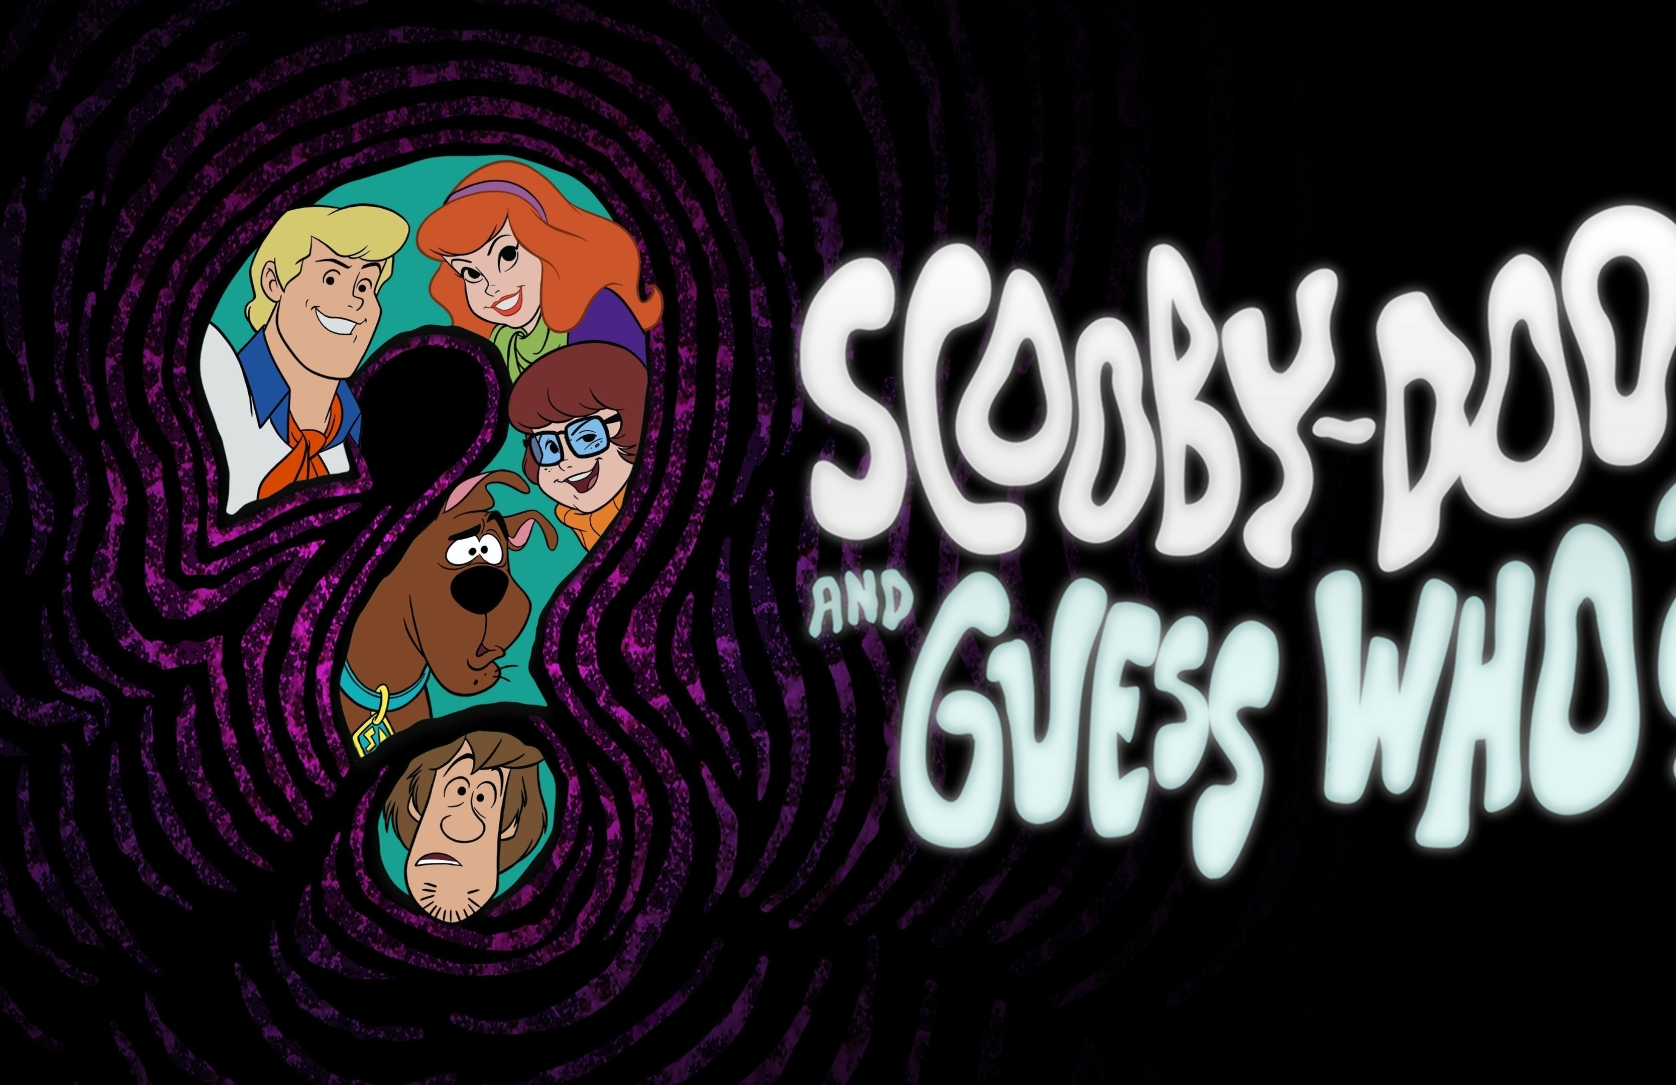 1676x1085 Scooby-Doo and Guess Who 4k 1676x1085 Resolution Wallpaper ...